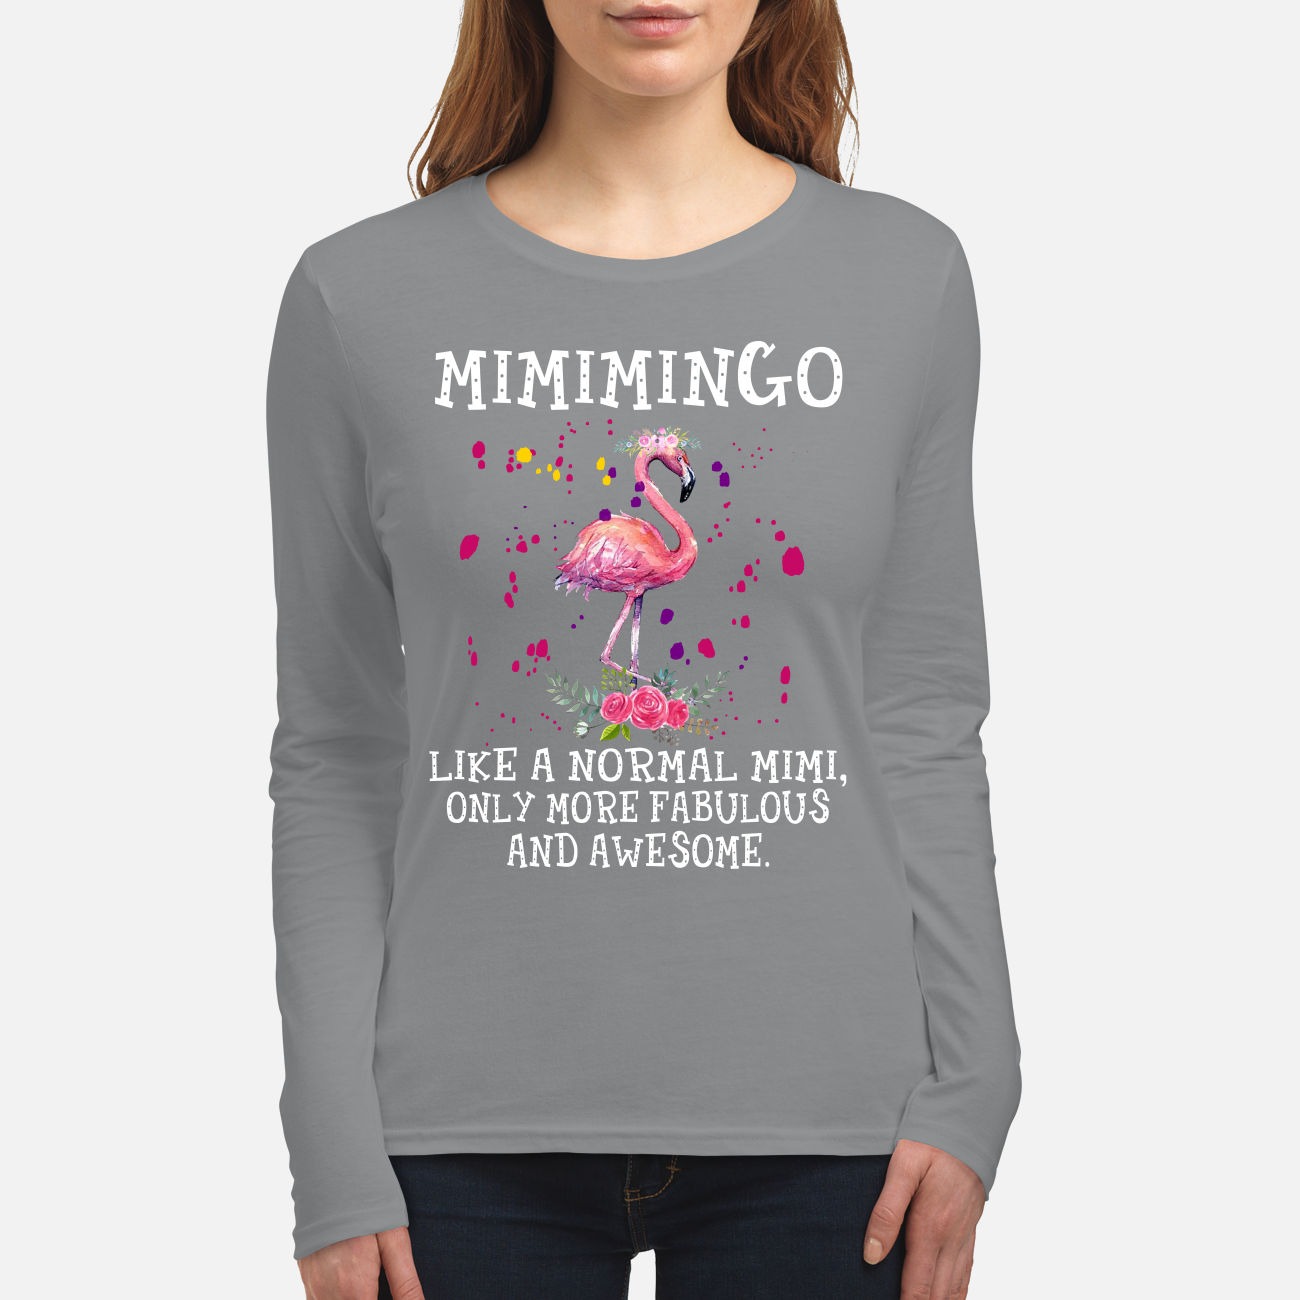 Mimingo like a normal mimi only more fabulous and awesome women's long sleeved shirt